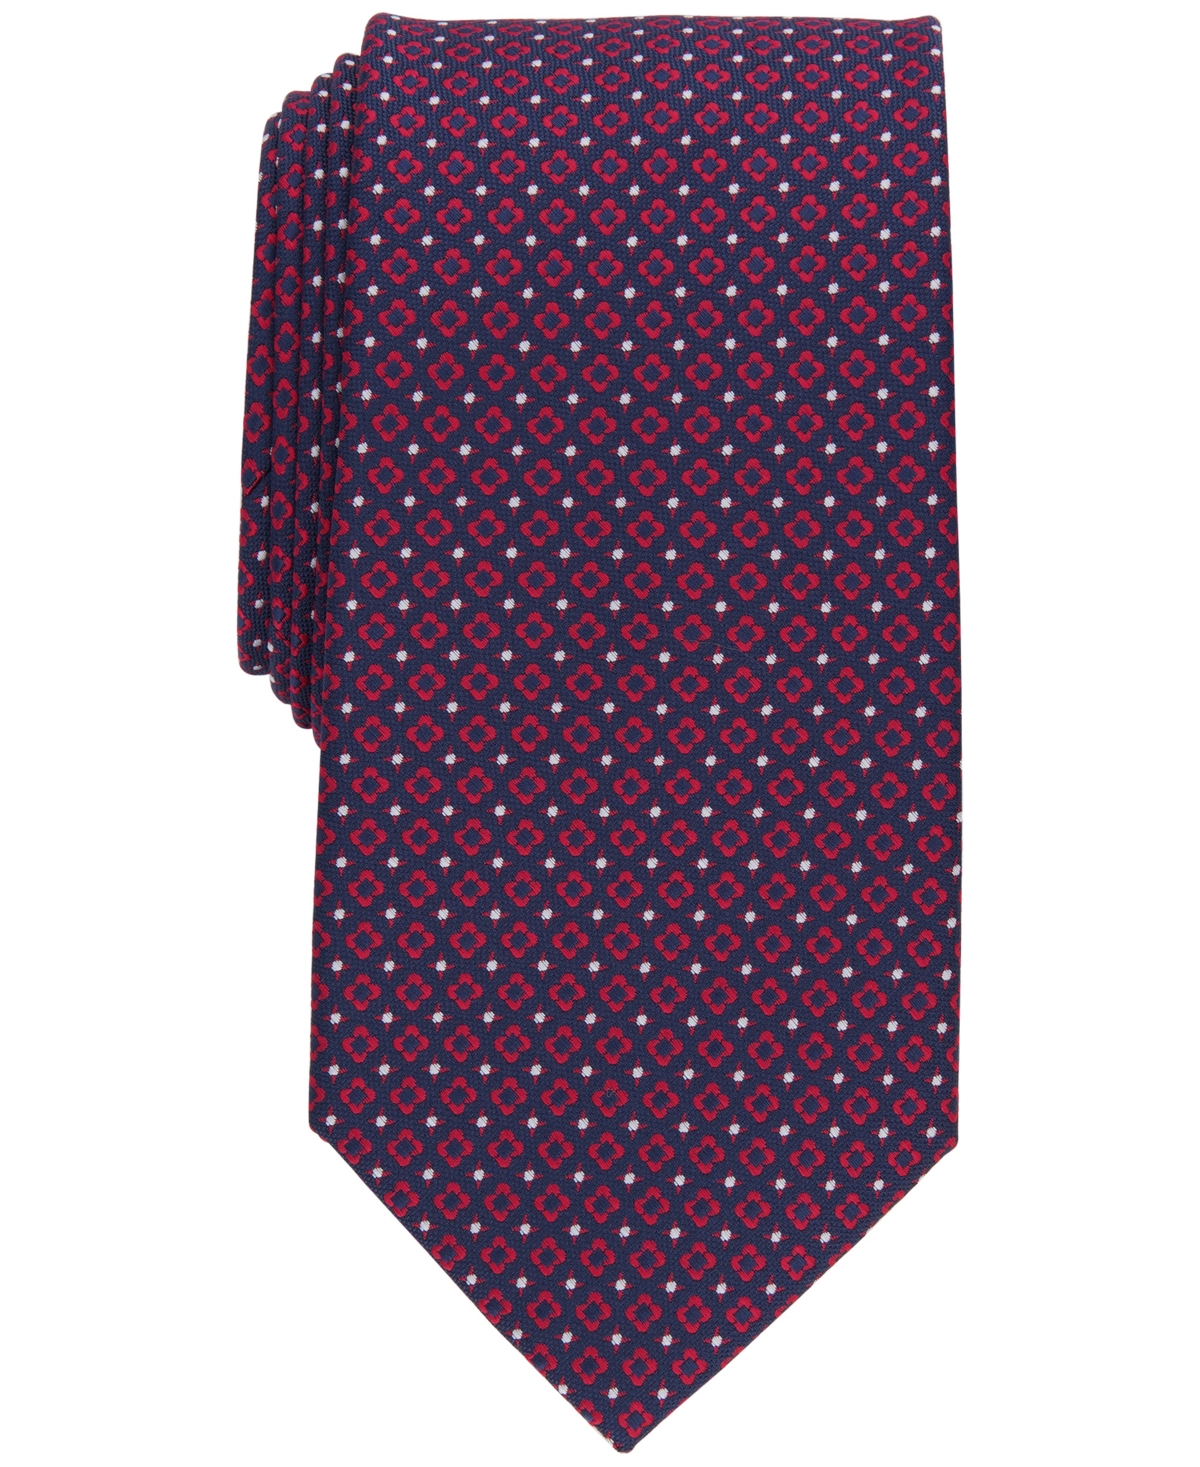 Men's Classic Floral Medallion Neat Tie, Created for Macy's - Pink